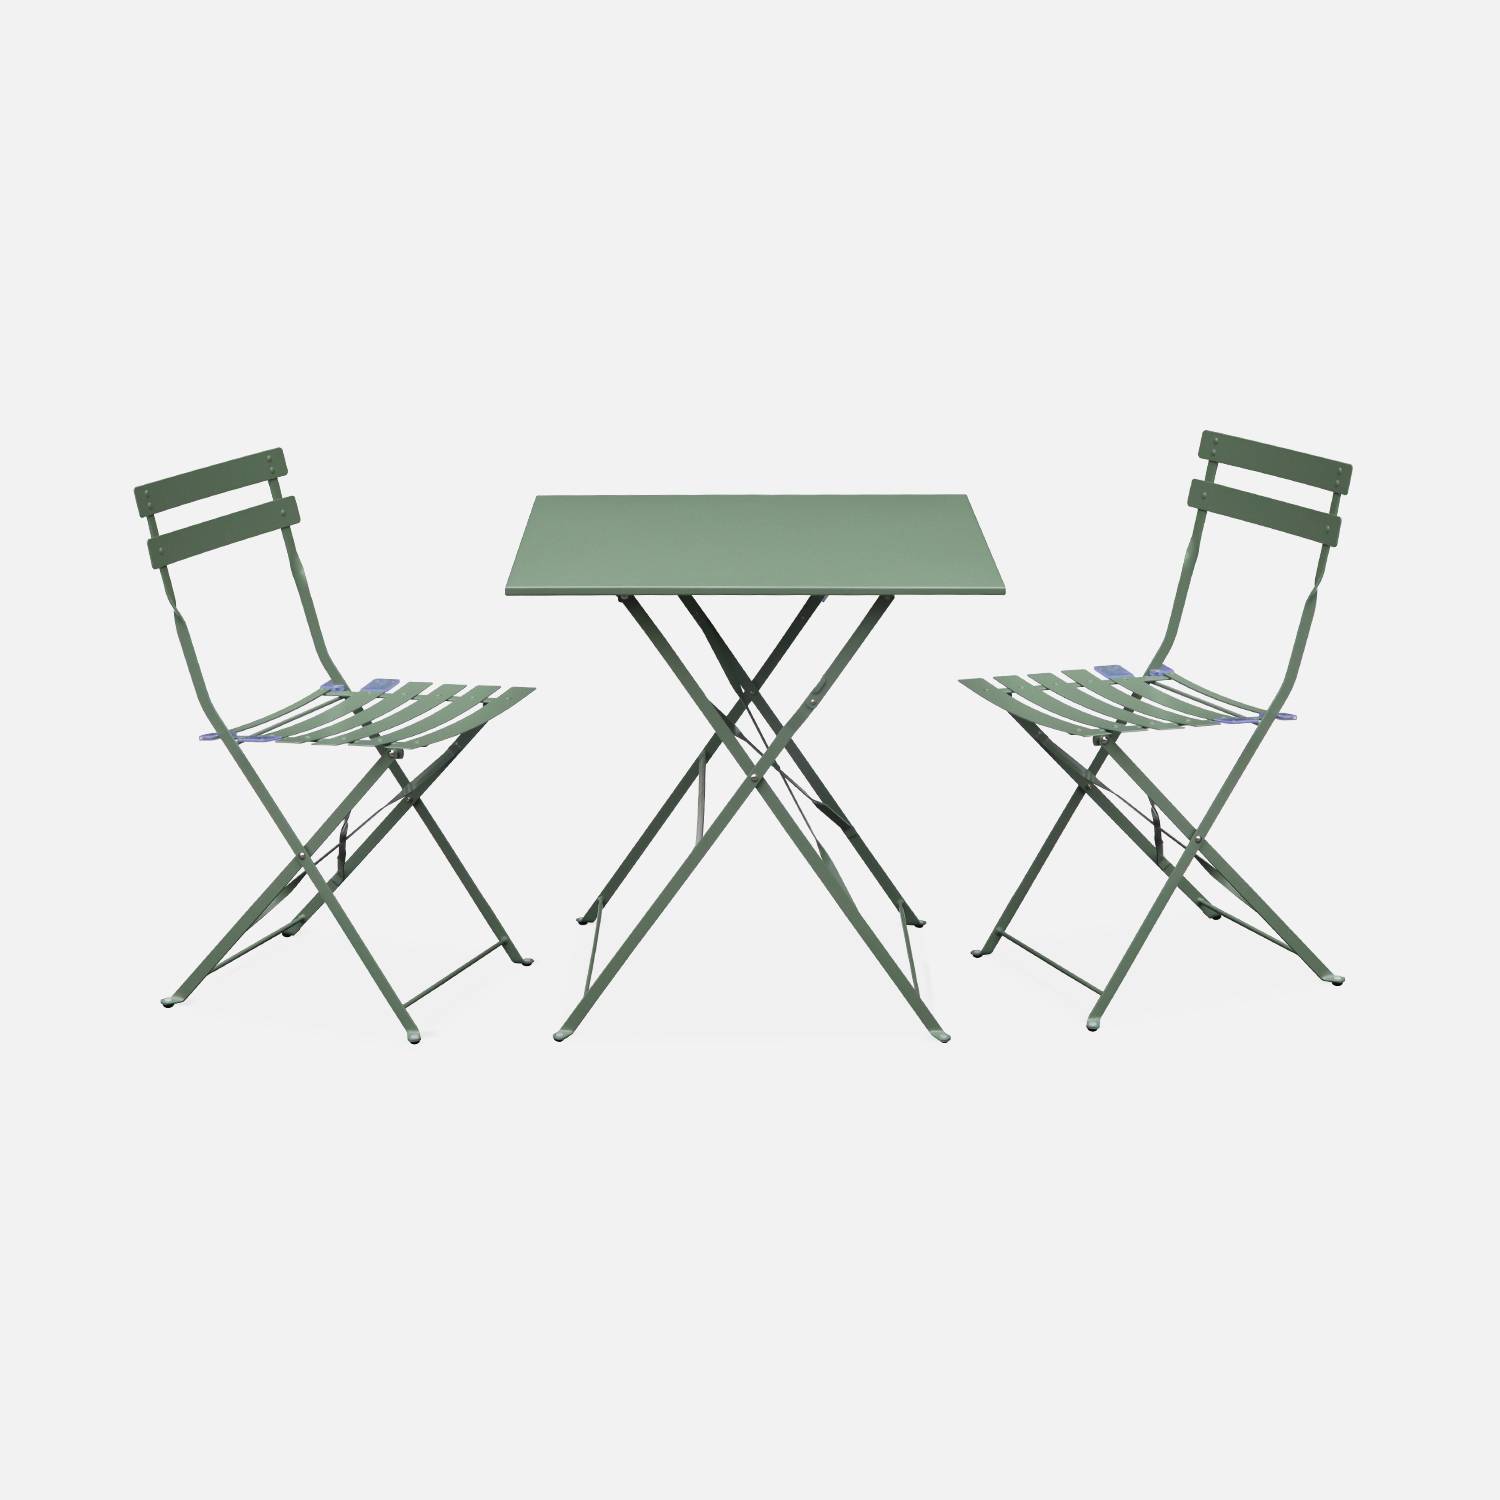 2-seater foldable thermo-lacquered steel bistro garden table with chairs, 70x70cm - Emilia - Sage geen,sweeek,Photo2